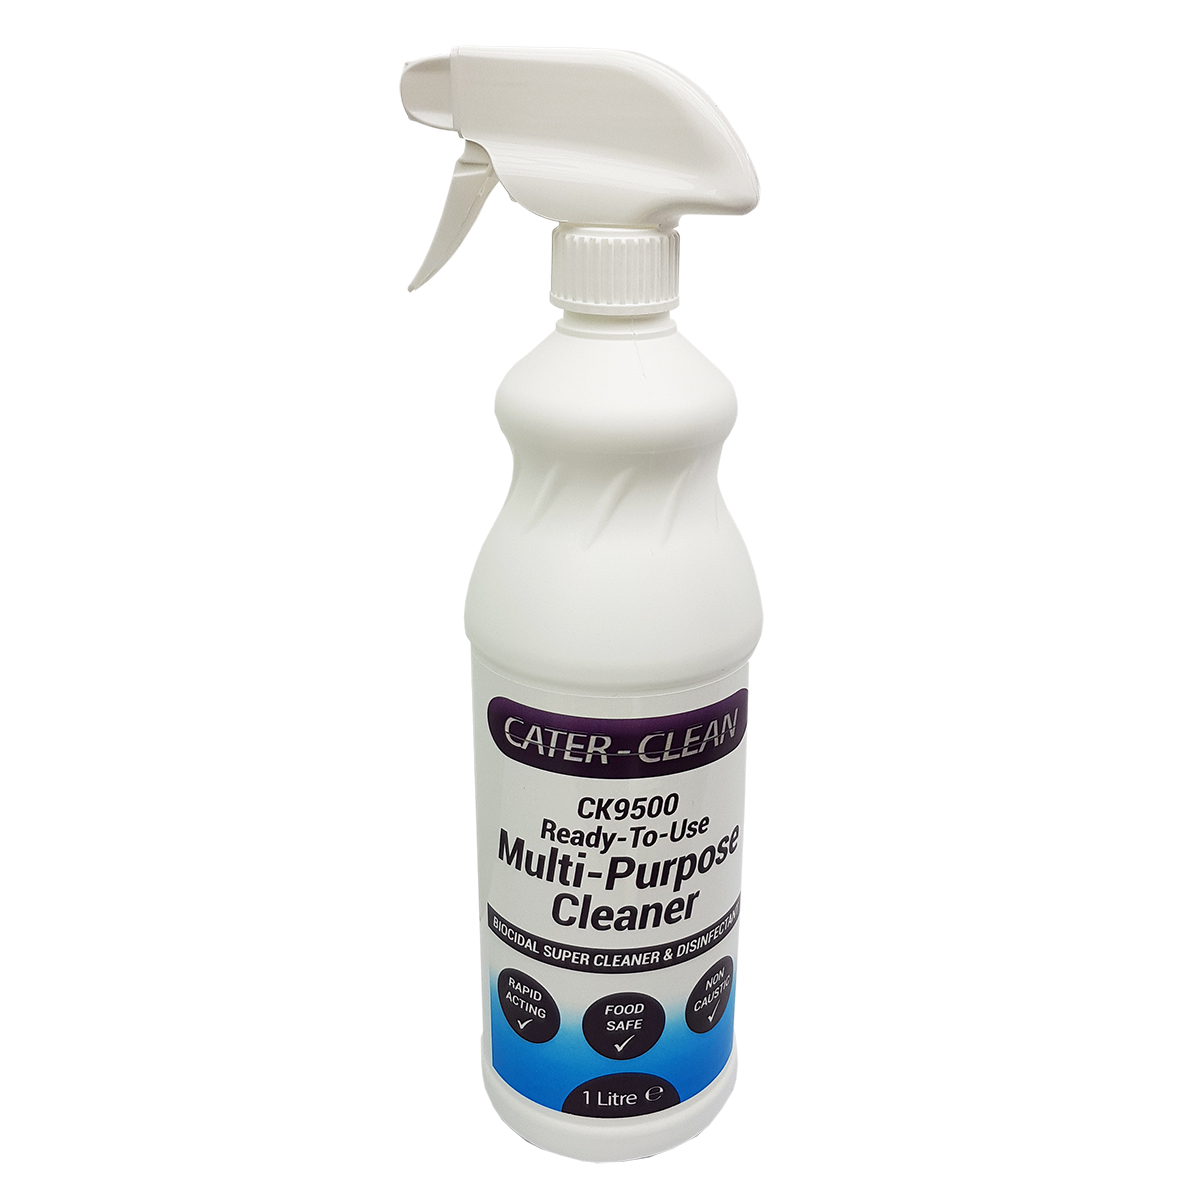 Cater-Clean CK9500 Multi-Purpose Food Safe Cleaning Spray - 1 Litre Bottle